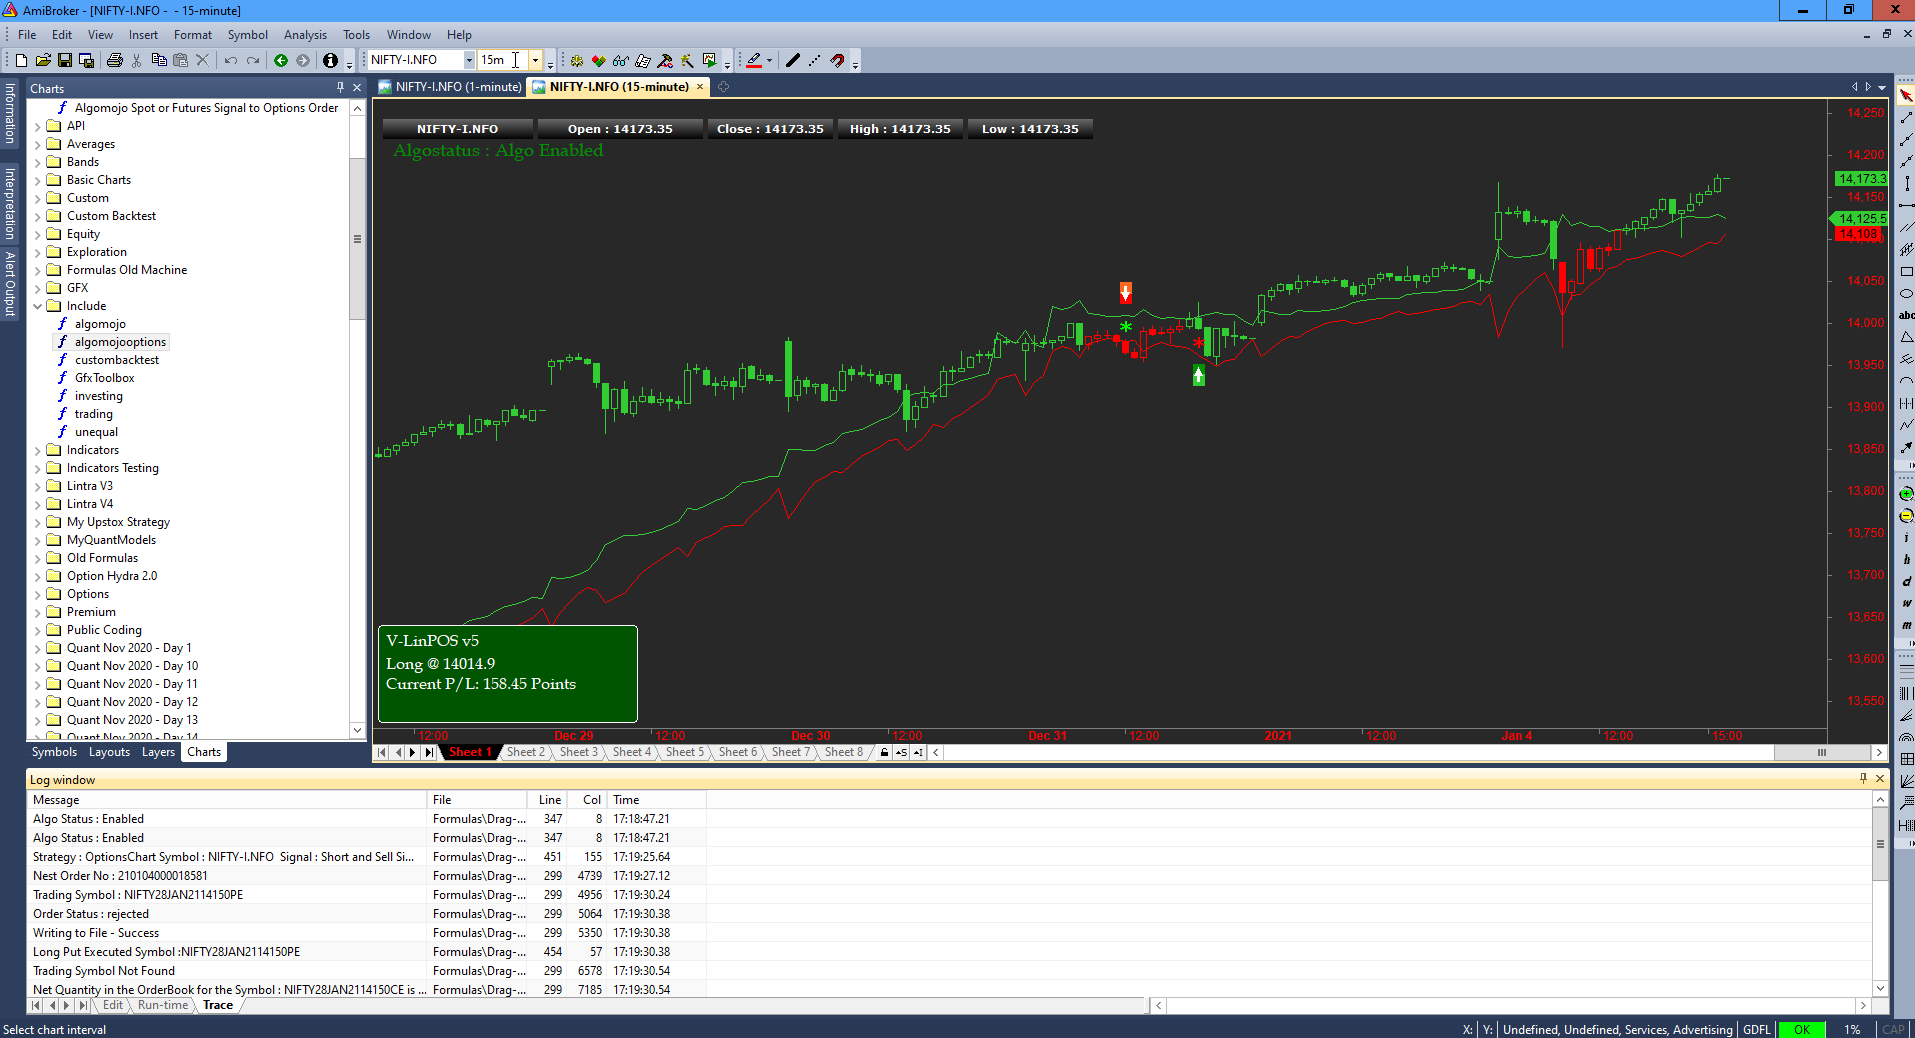 Send Smart Options Execution Orders From Futures Or Spot Signals In Amibroker Using Algomojo Platform